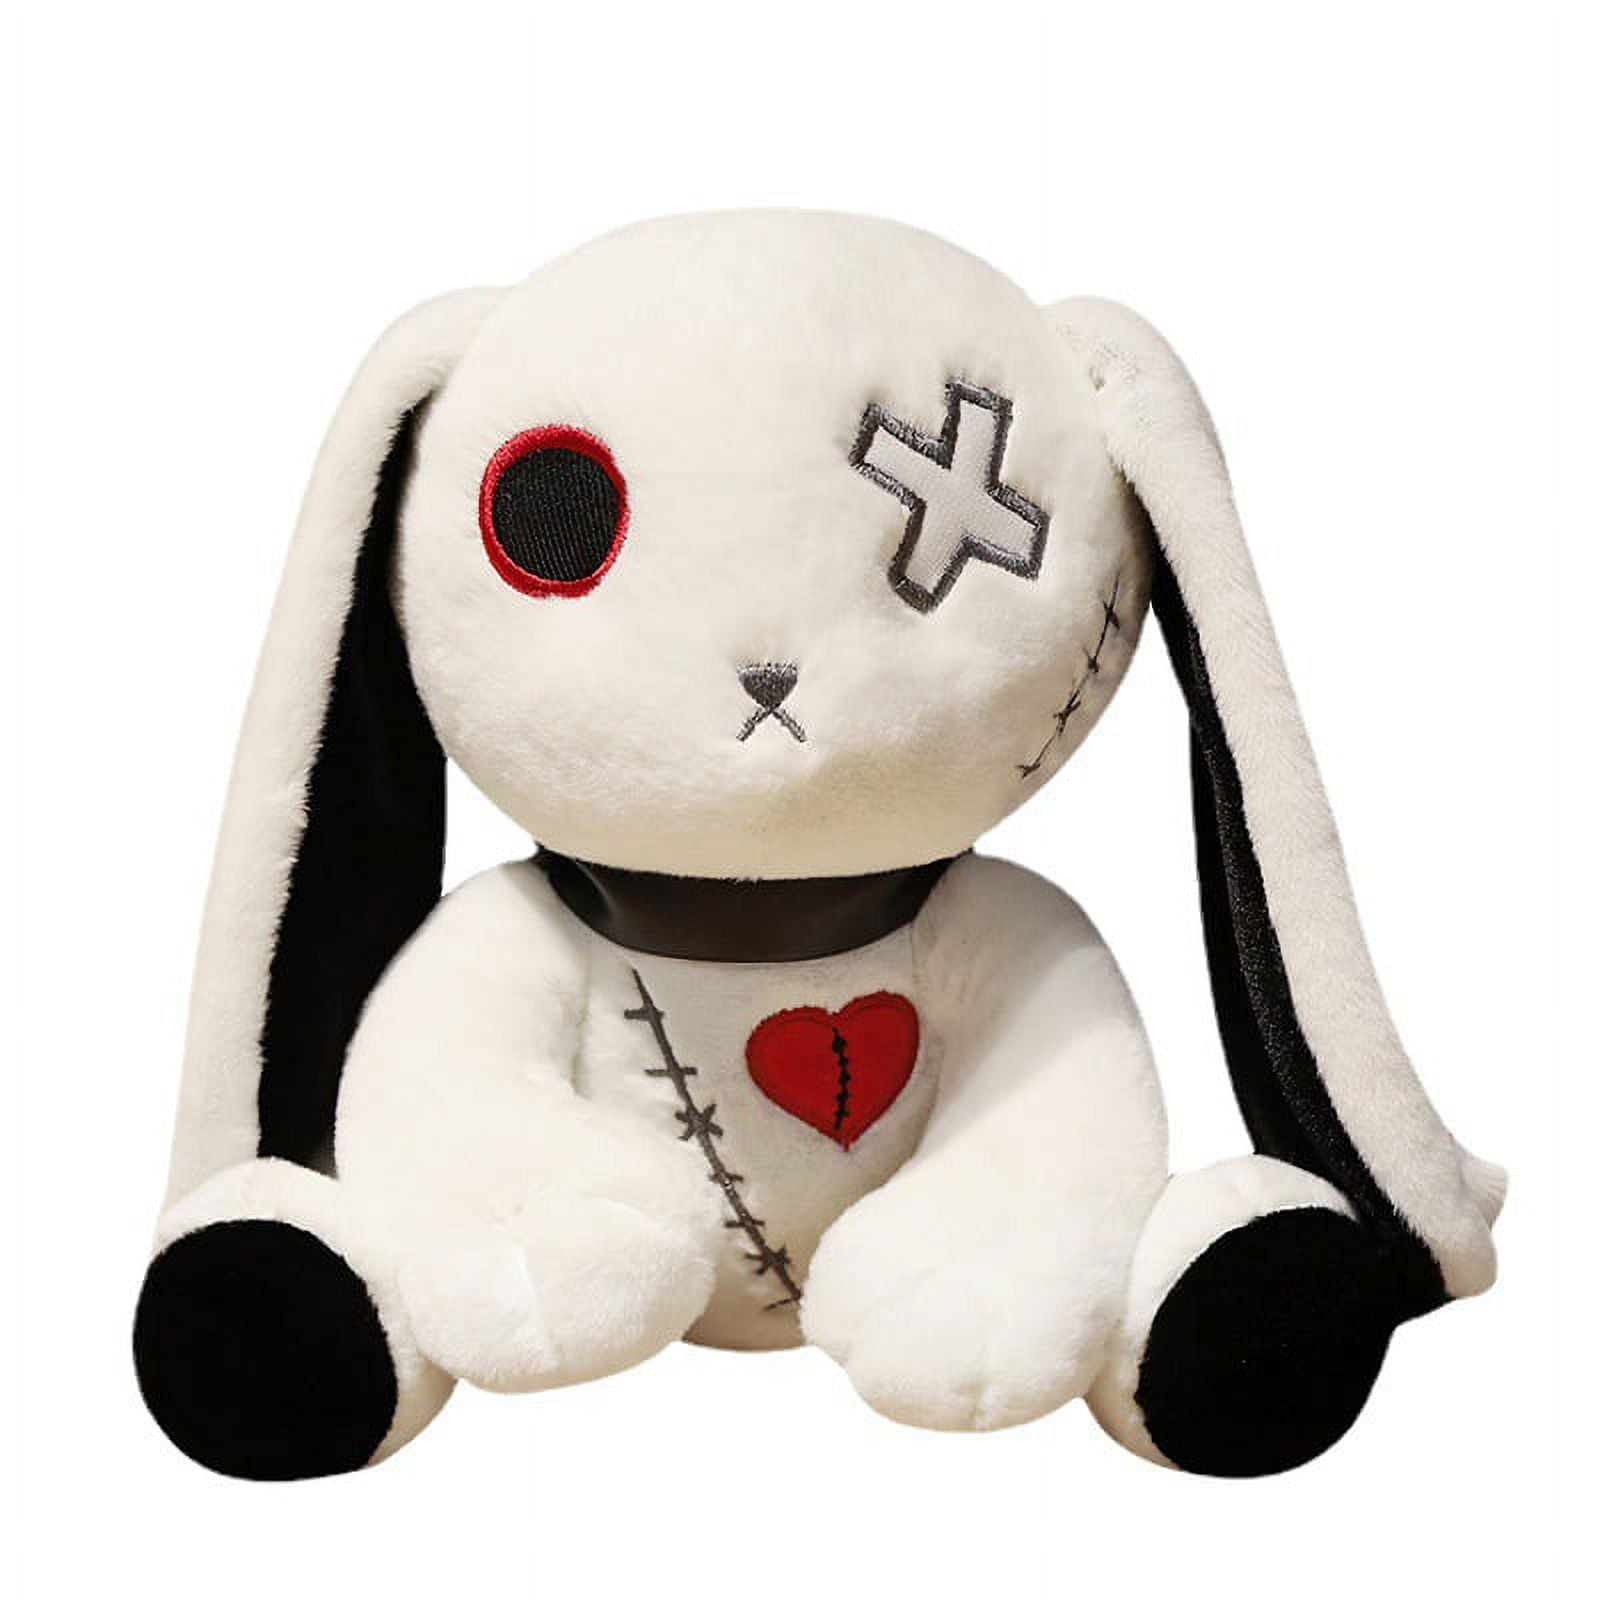 New without tag Creepy Bunny plush toy, Rabbit soft doll, Scary